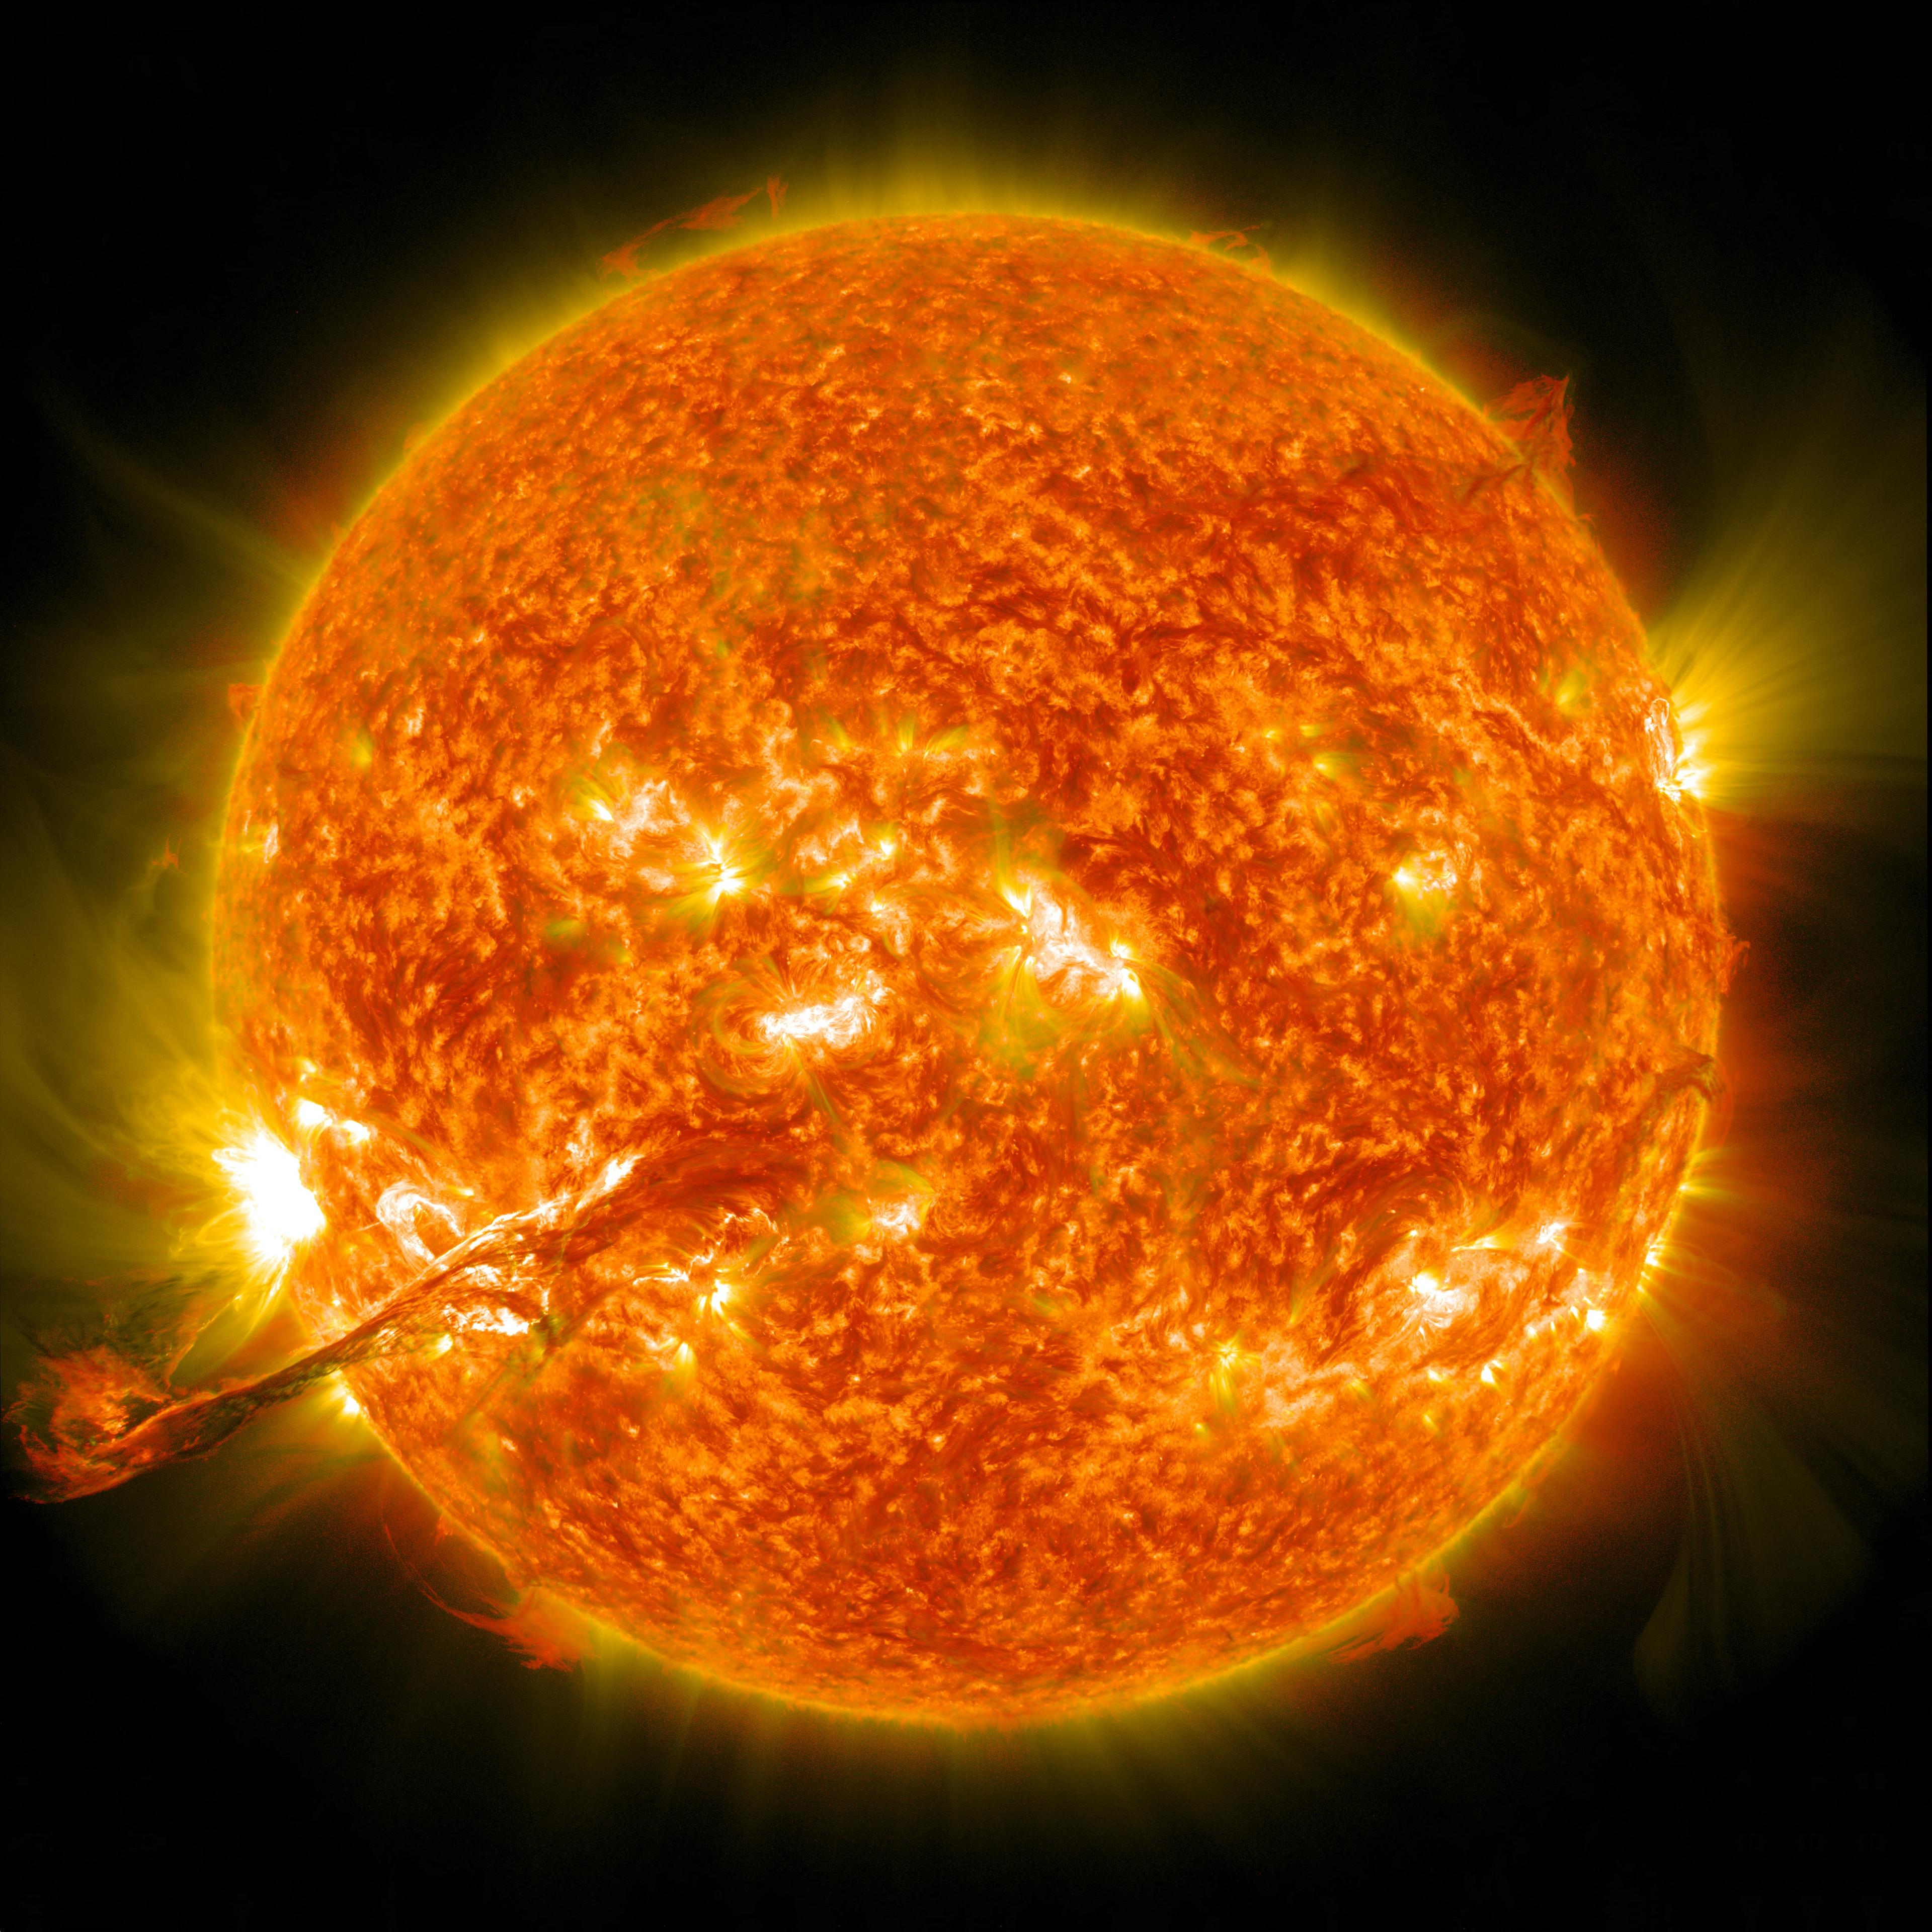 A vibrant image of the Sun showcasing dynamic solar activity, with bright flares and prominences extending from the surface, set against the dark backdrop of space.